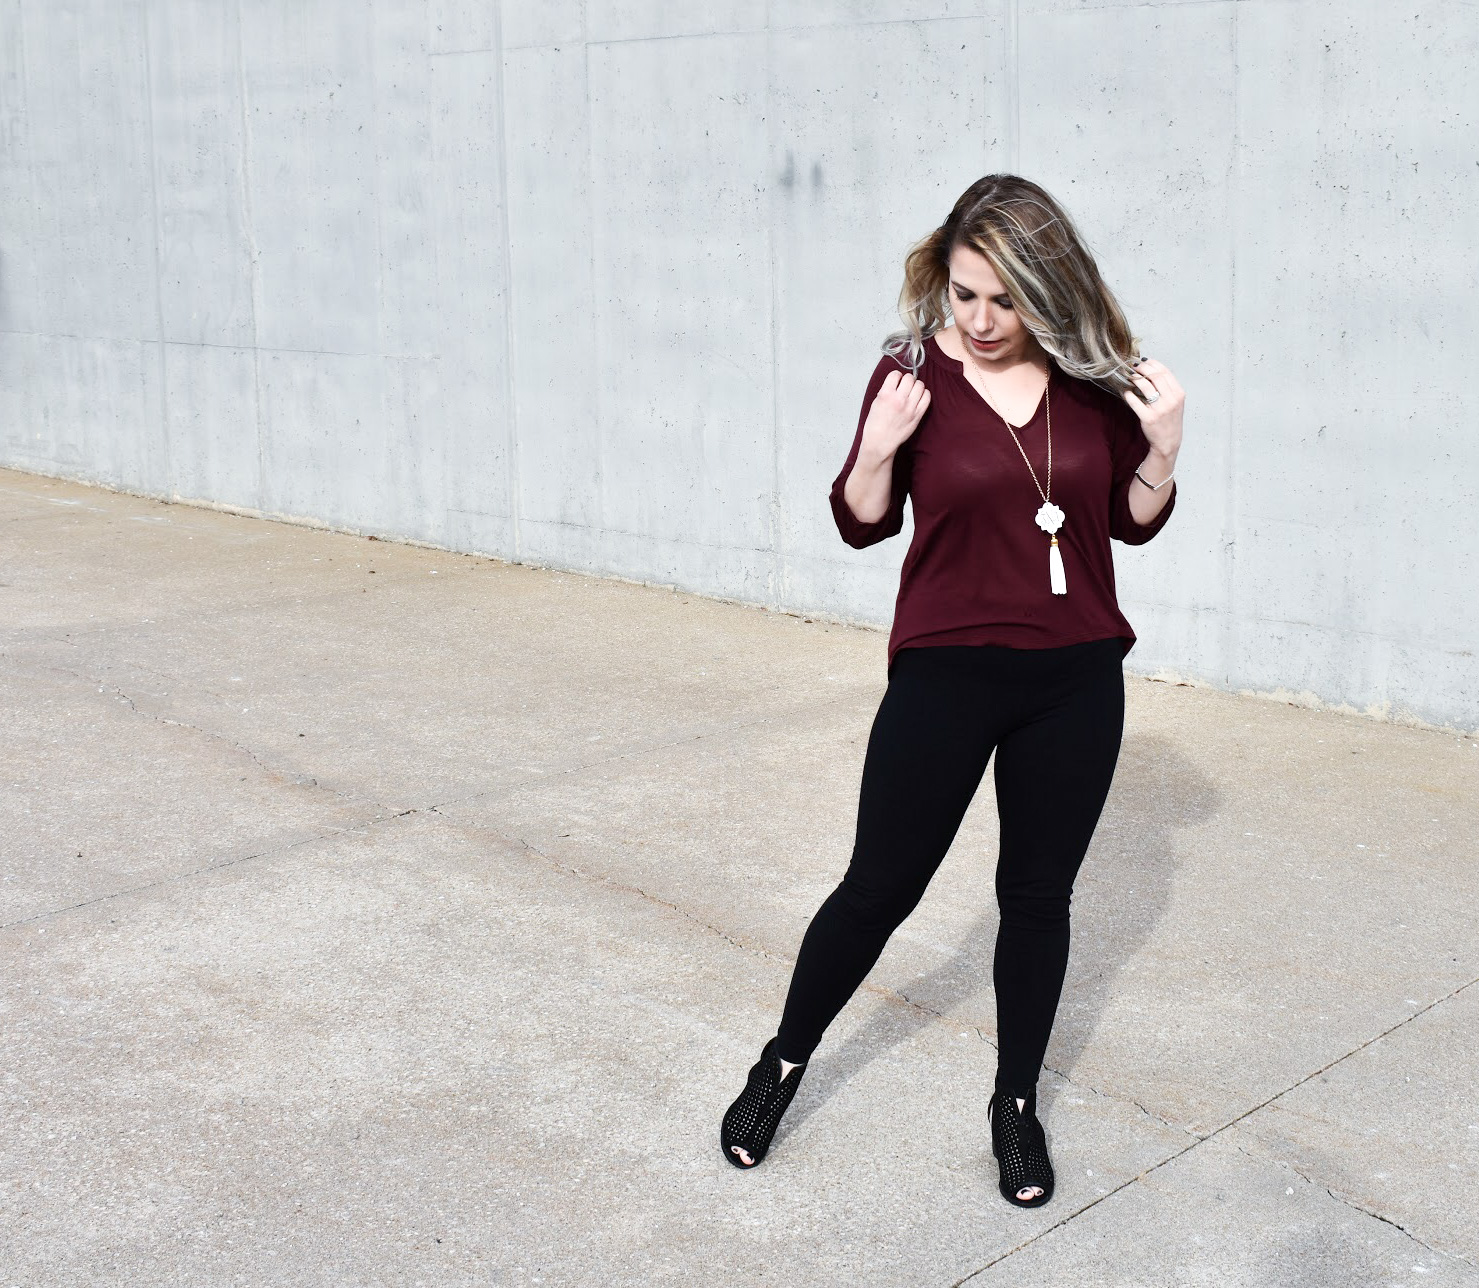 Dress Up Leggings with Ankle Boots. One of my favorite outfit ideas for leggings is to dress the leggings up with some stylish ankle boots! Take leggings from day to night with this easy styling trick! Here, I styled black leggings with black ankle boots for a sleek monochromatic look.